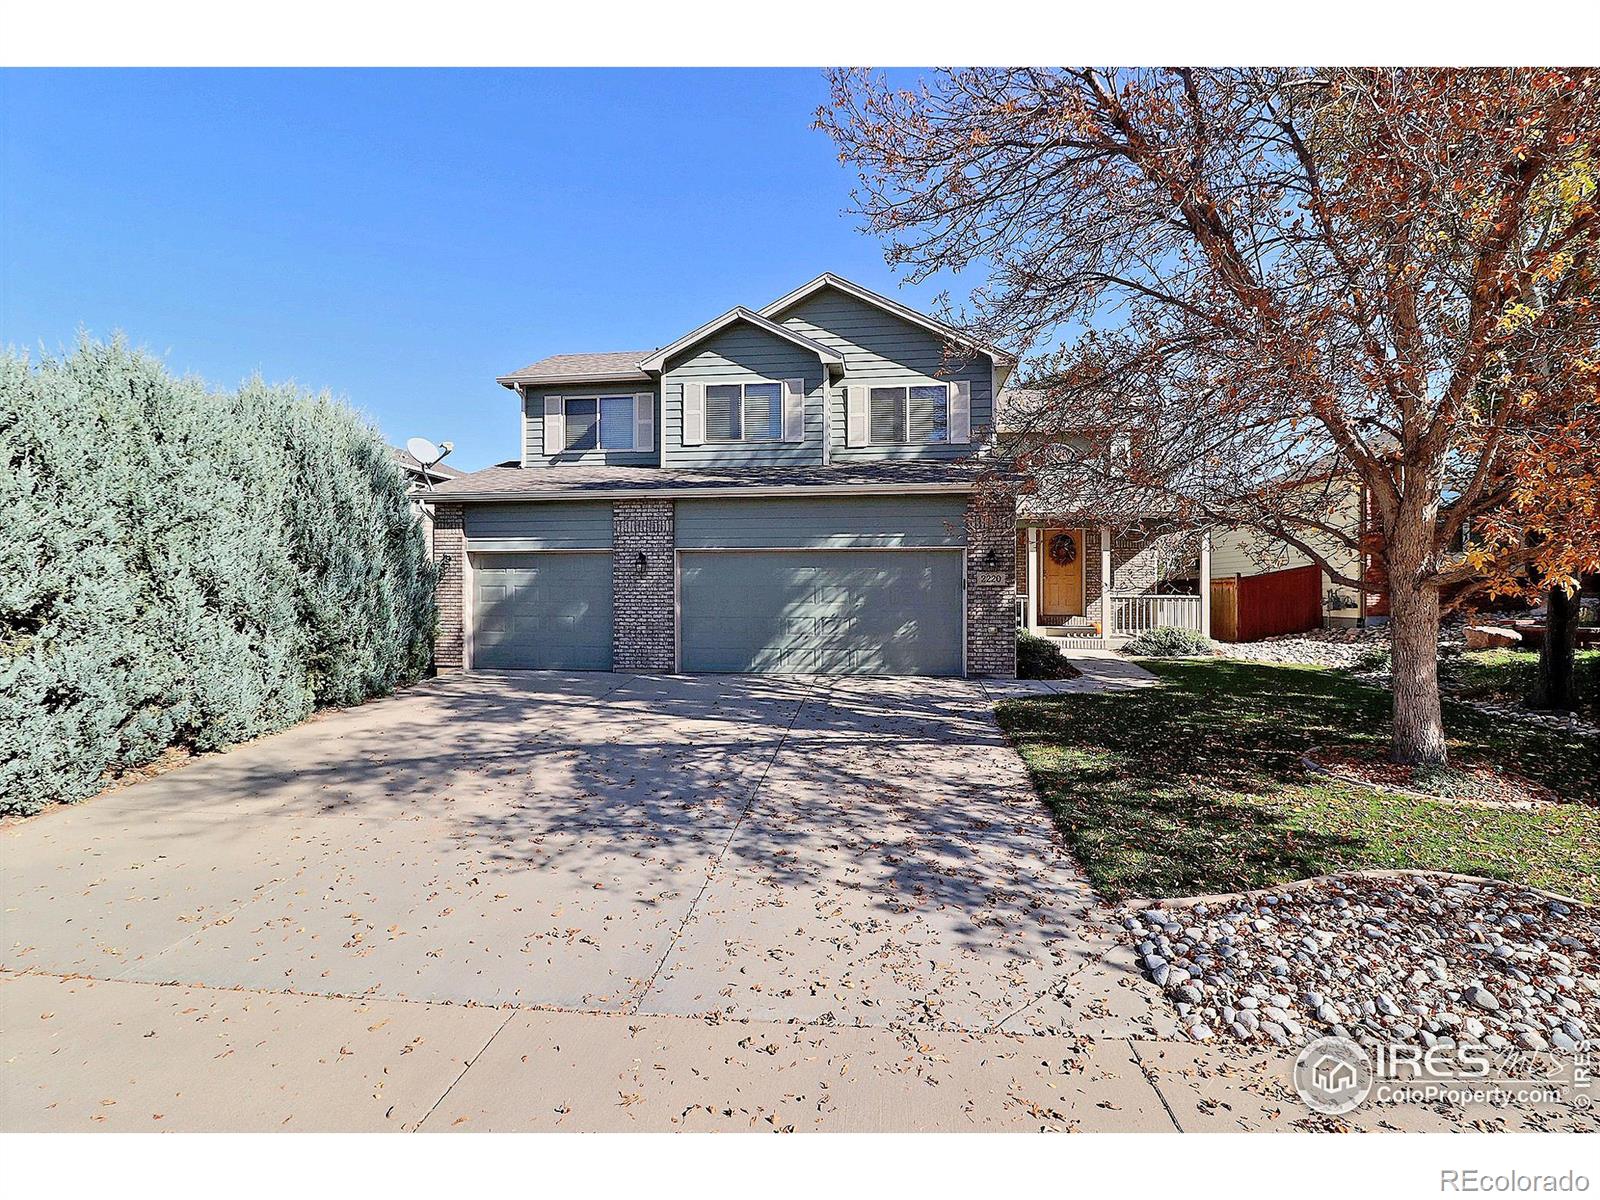 2220  72nd Ave Ct, greeley MLS: 456789998625 Beds: 5 Baths: 4 Price: $499,000